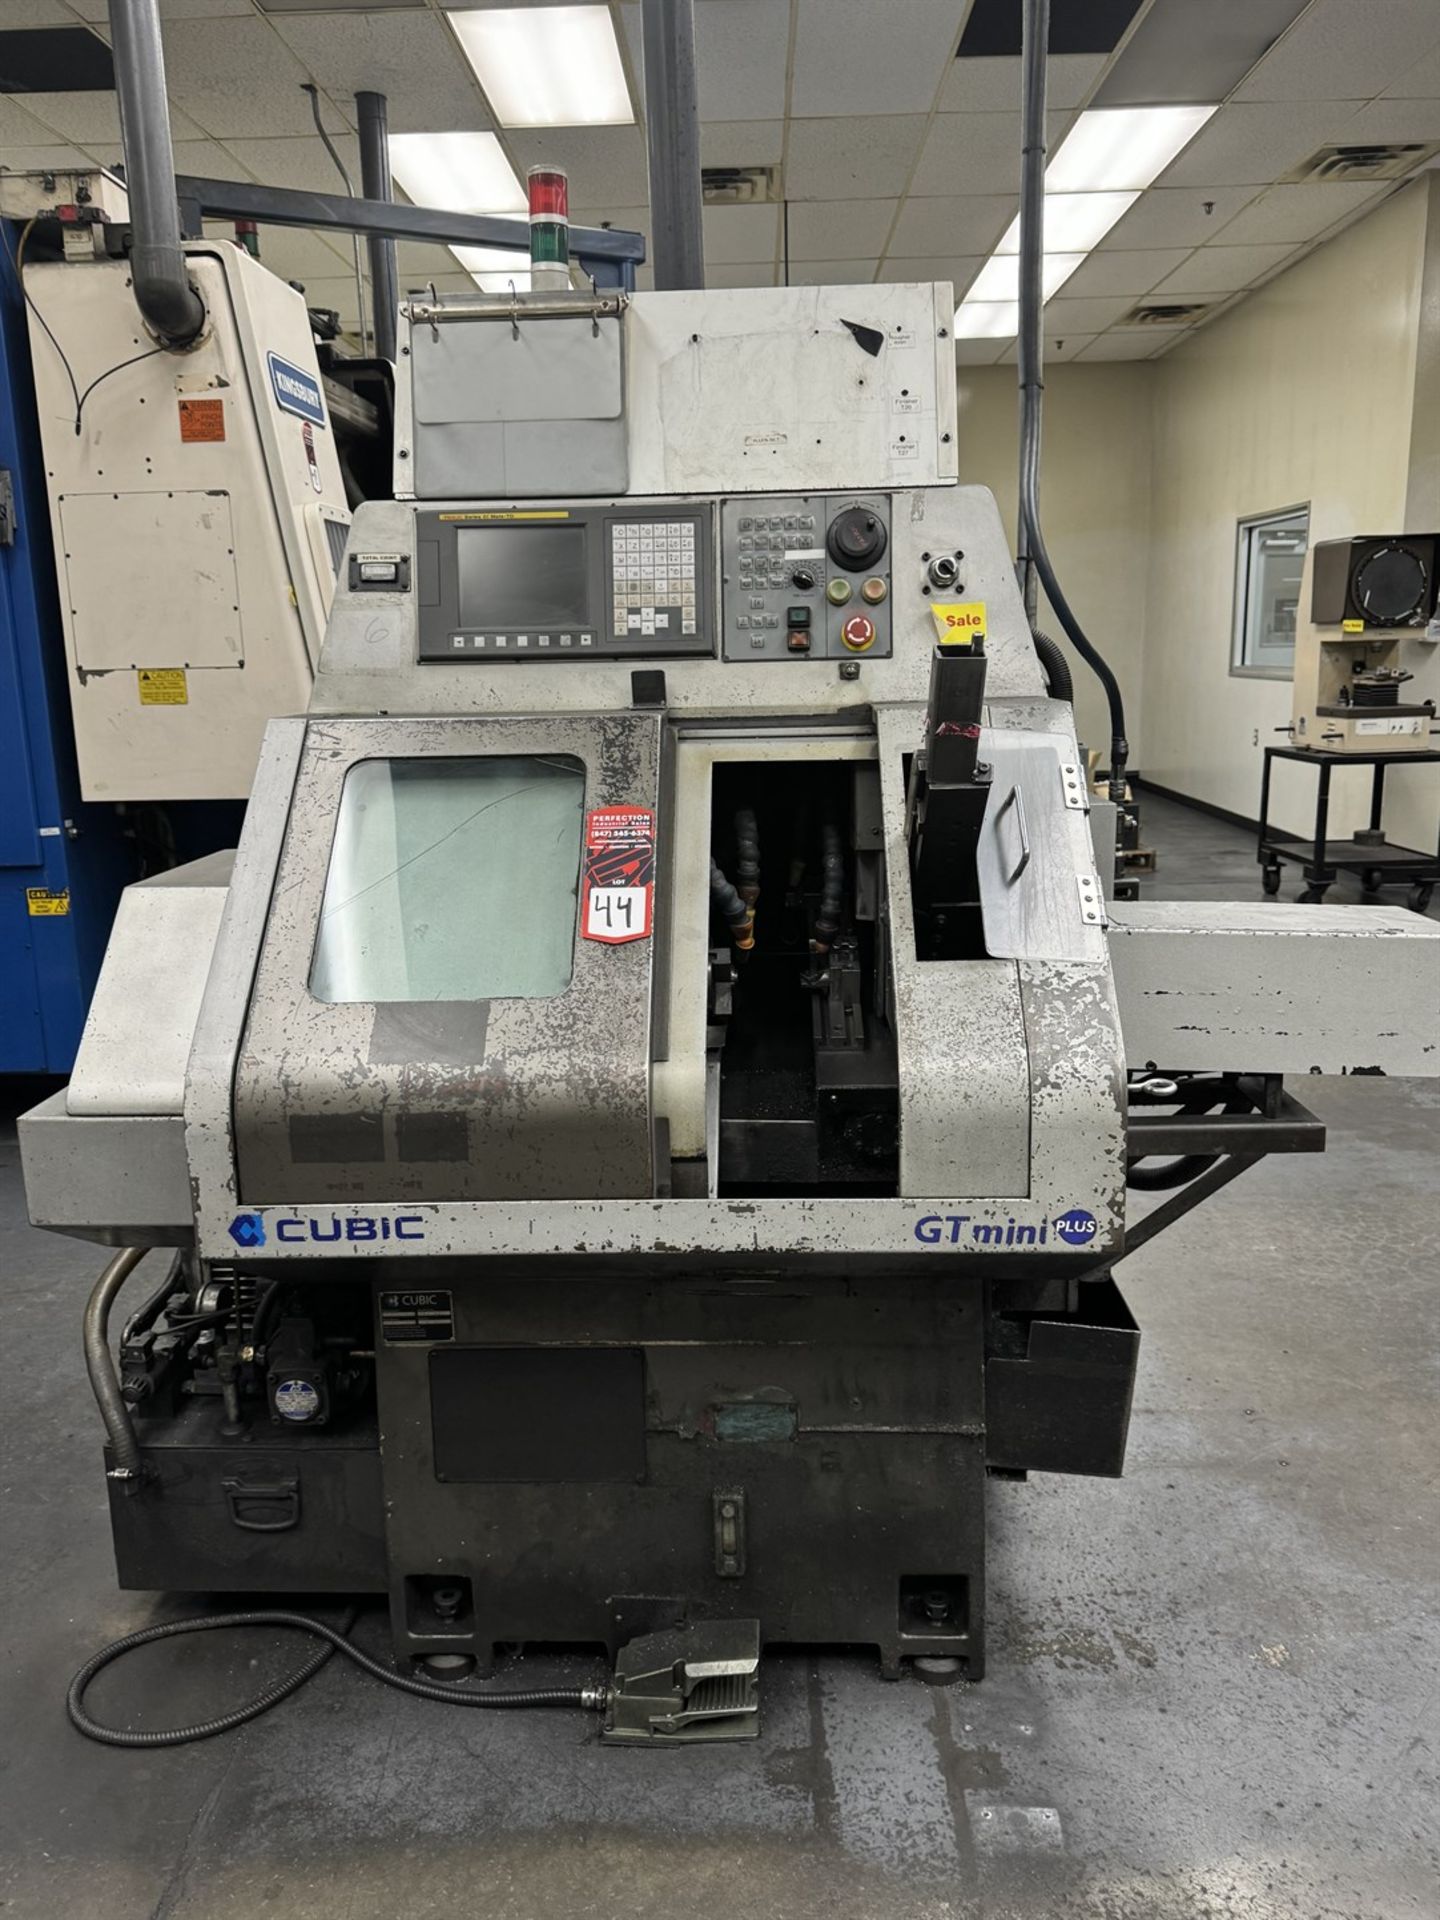 CUBIC GT-MINI Plus CNC Gang Tool Lathe, s/n 8801087, Fanuc Series Oi Mate-TD Control, 60mm Turning D - Image 2 of 9